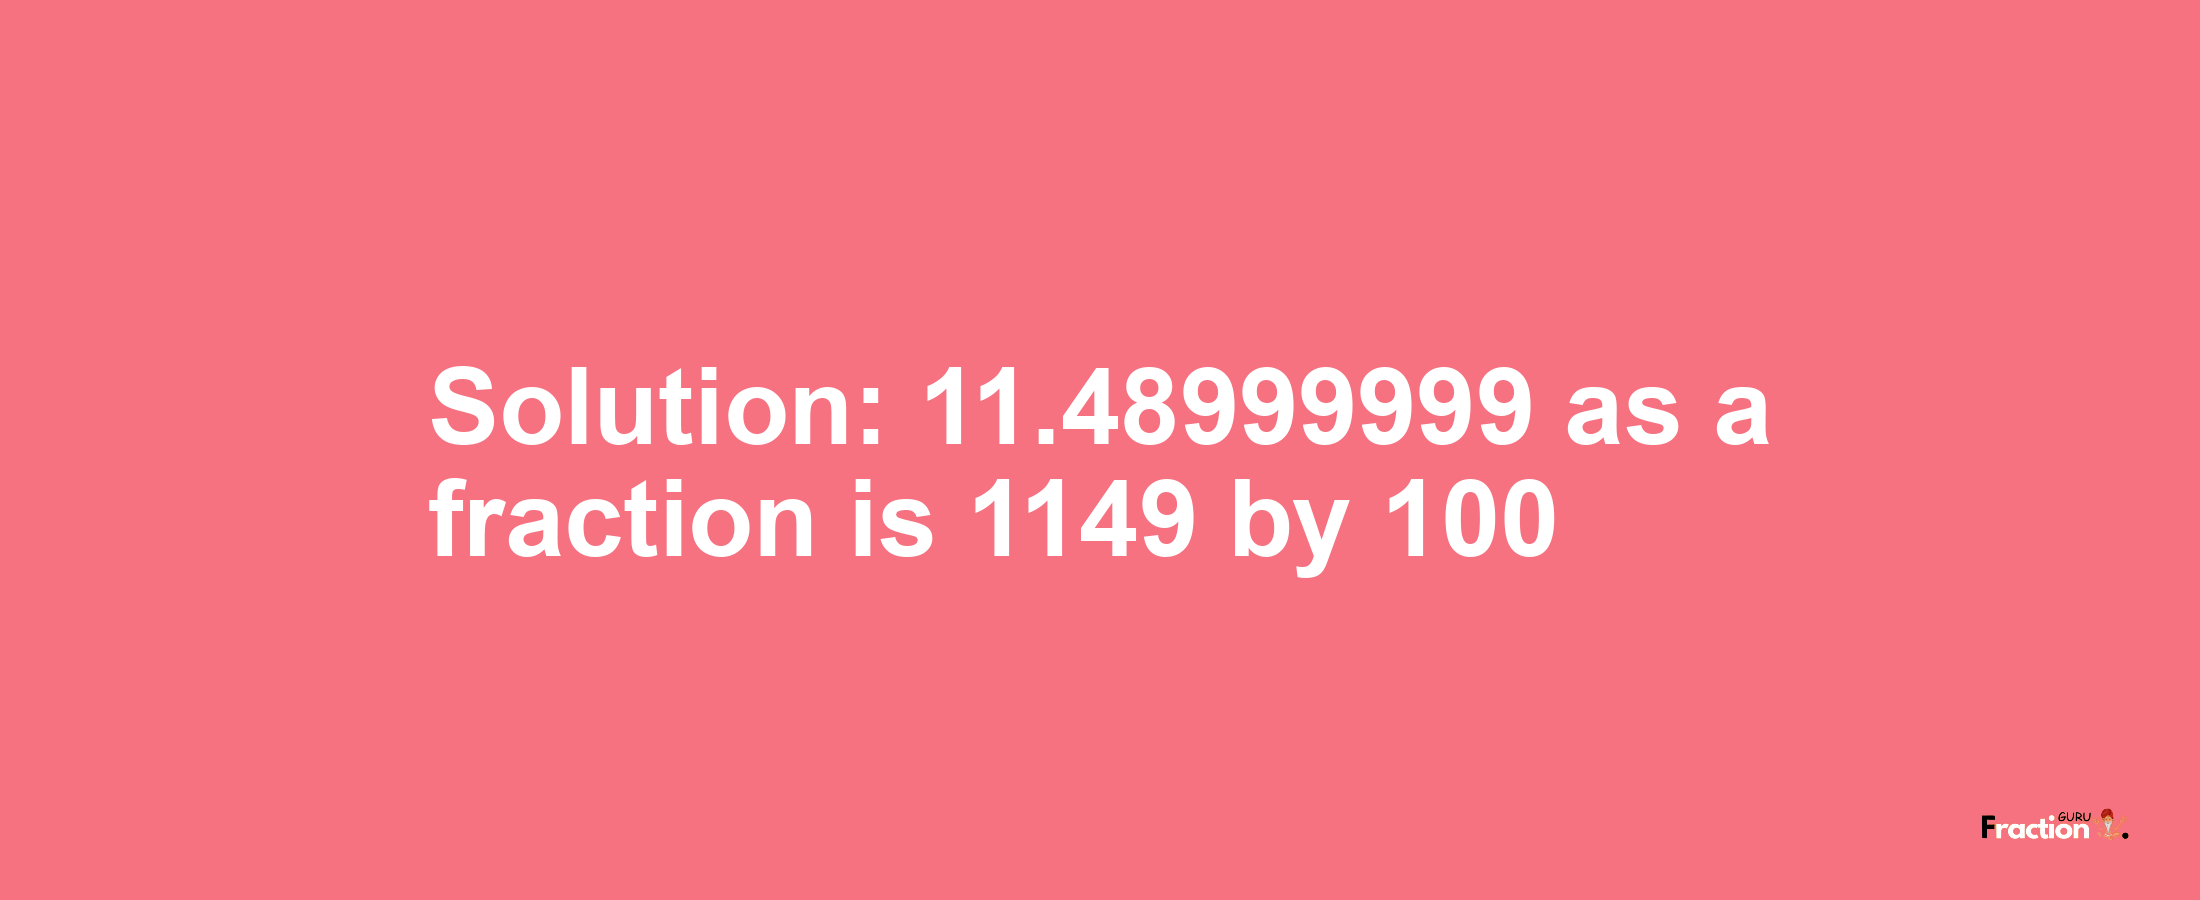 Solution:11.48999999 as a fraction is 1149/100